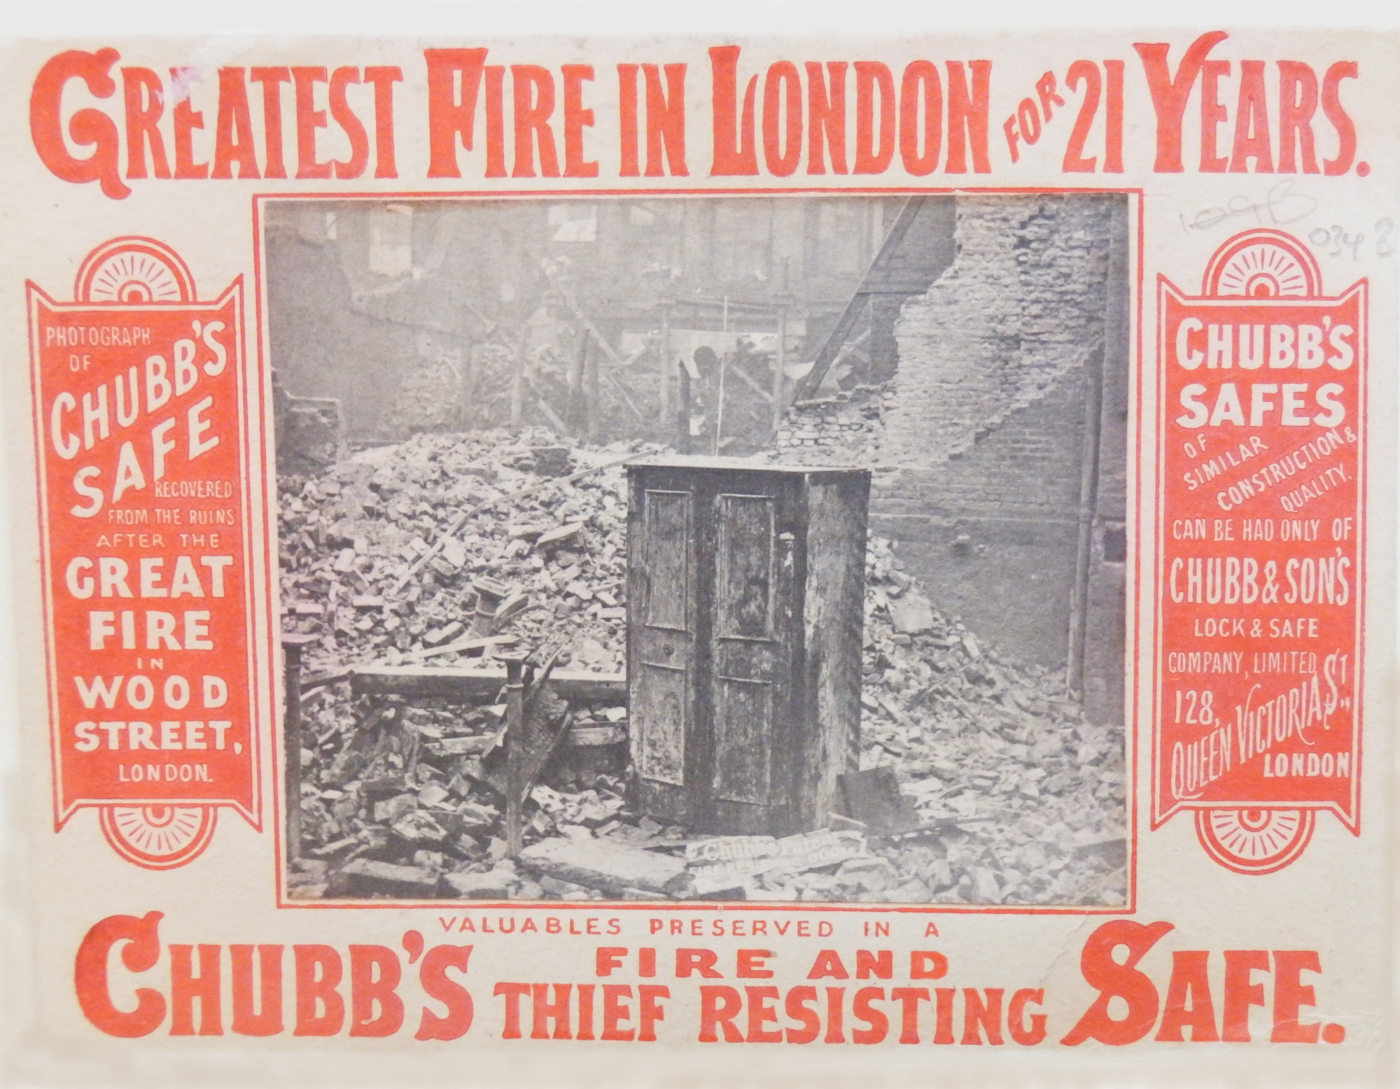 An advertising card for Chubb’s safes, 1883.